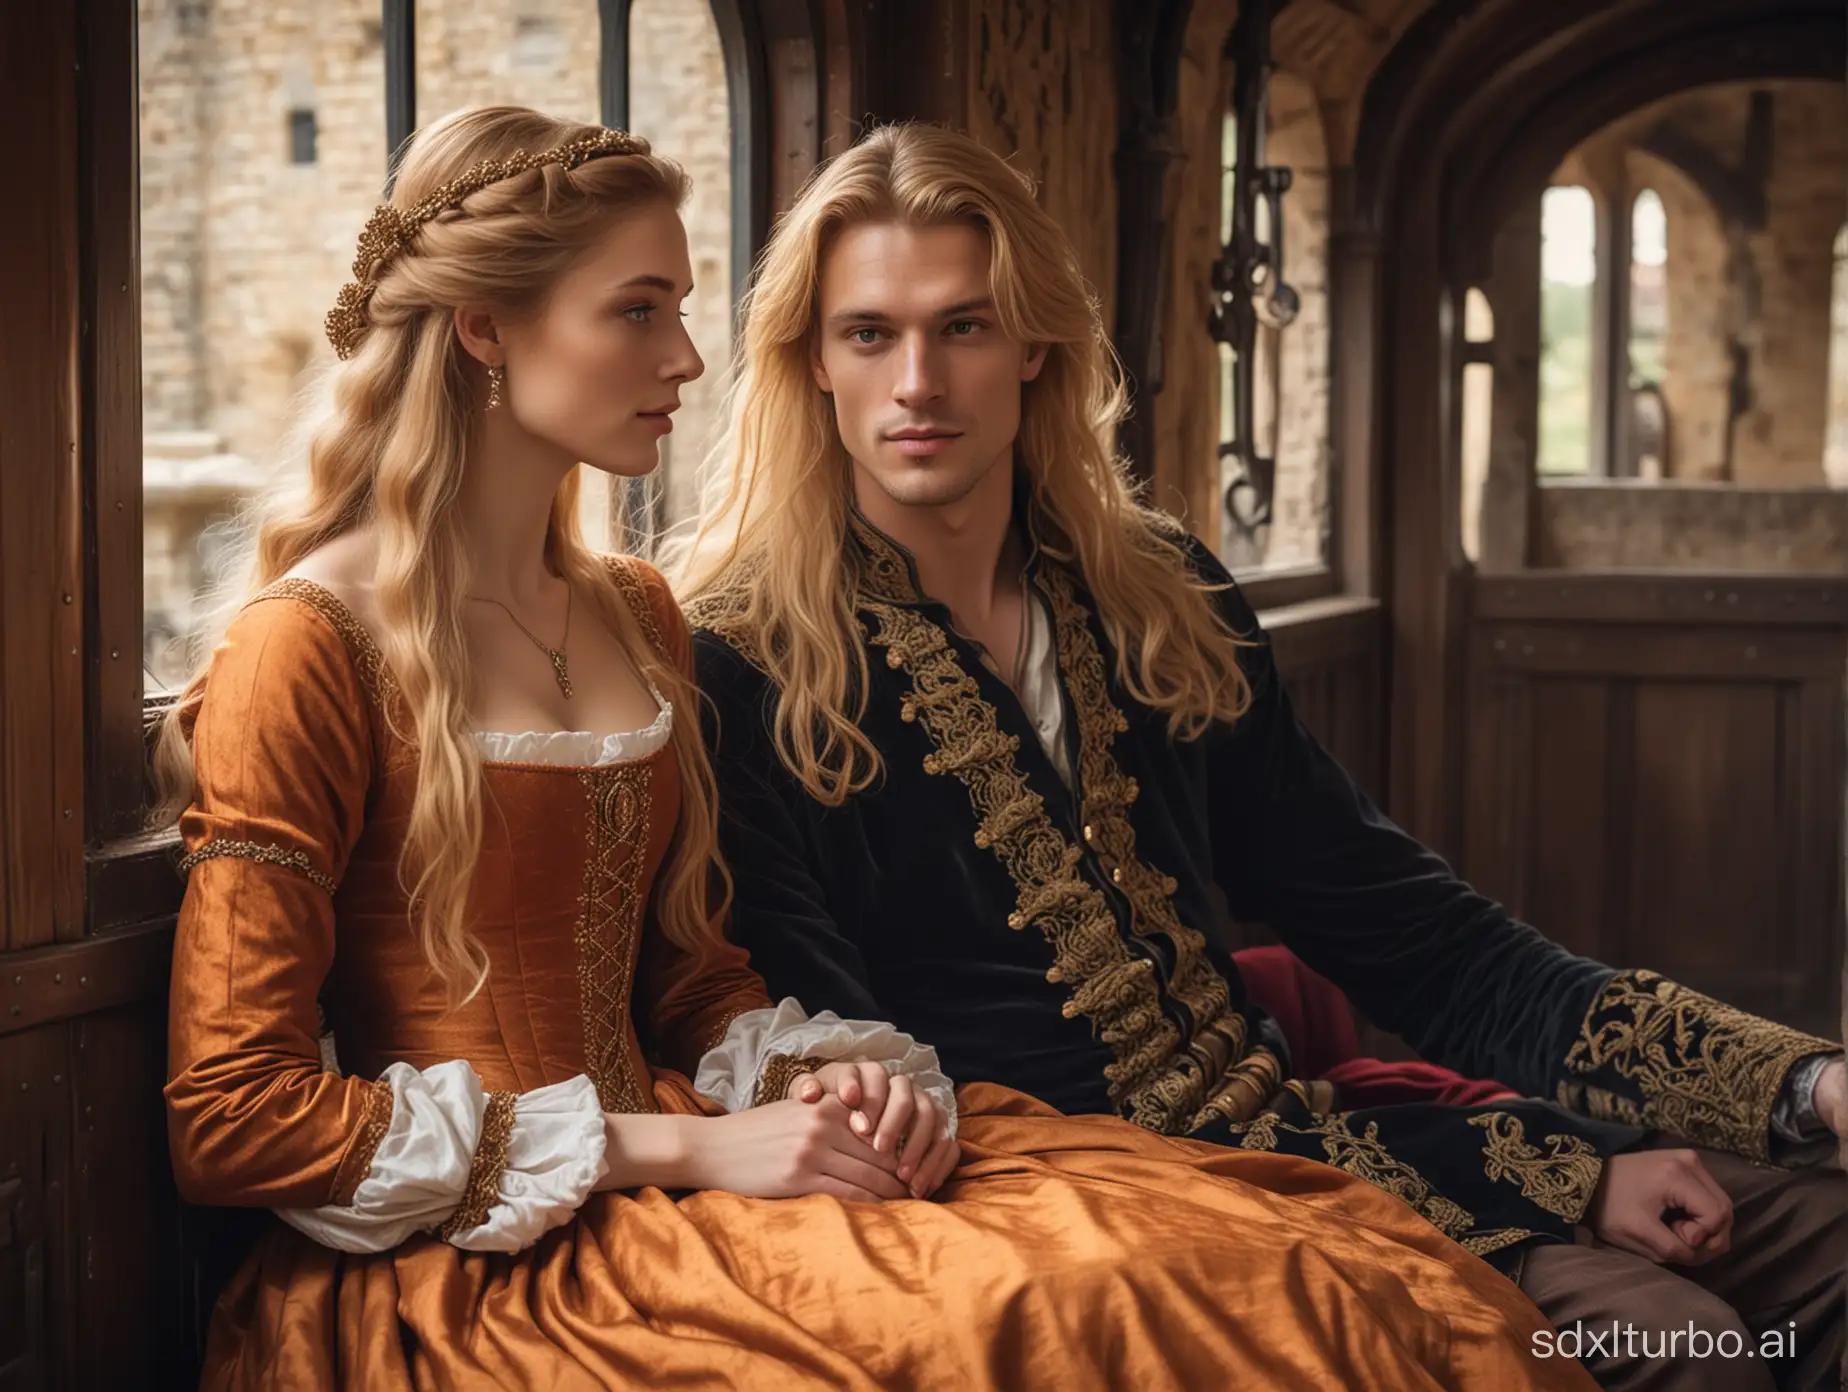 Medieval-Couple-in-Luxurious-Carriage-Handsome-Blond-Man-and-Beautiful-RussetHaired-Woman